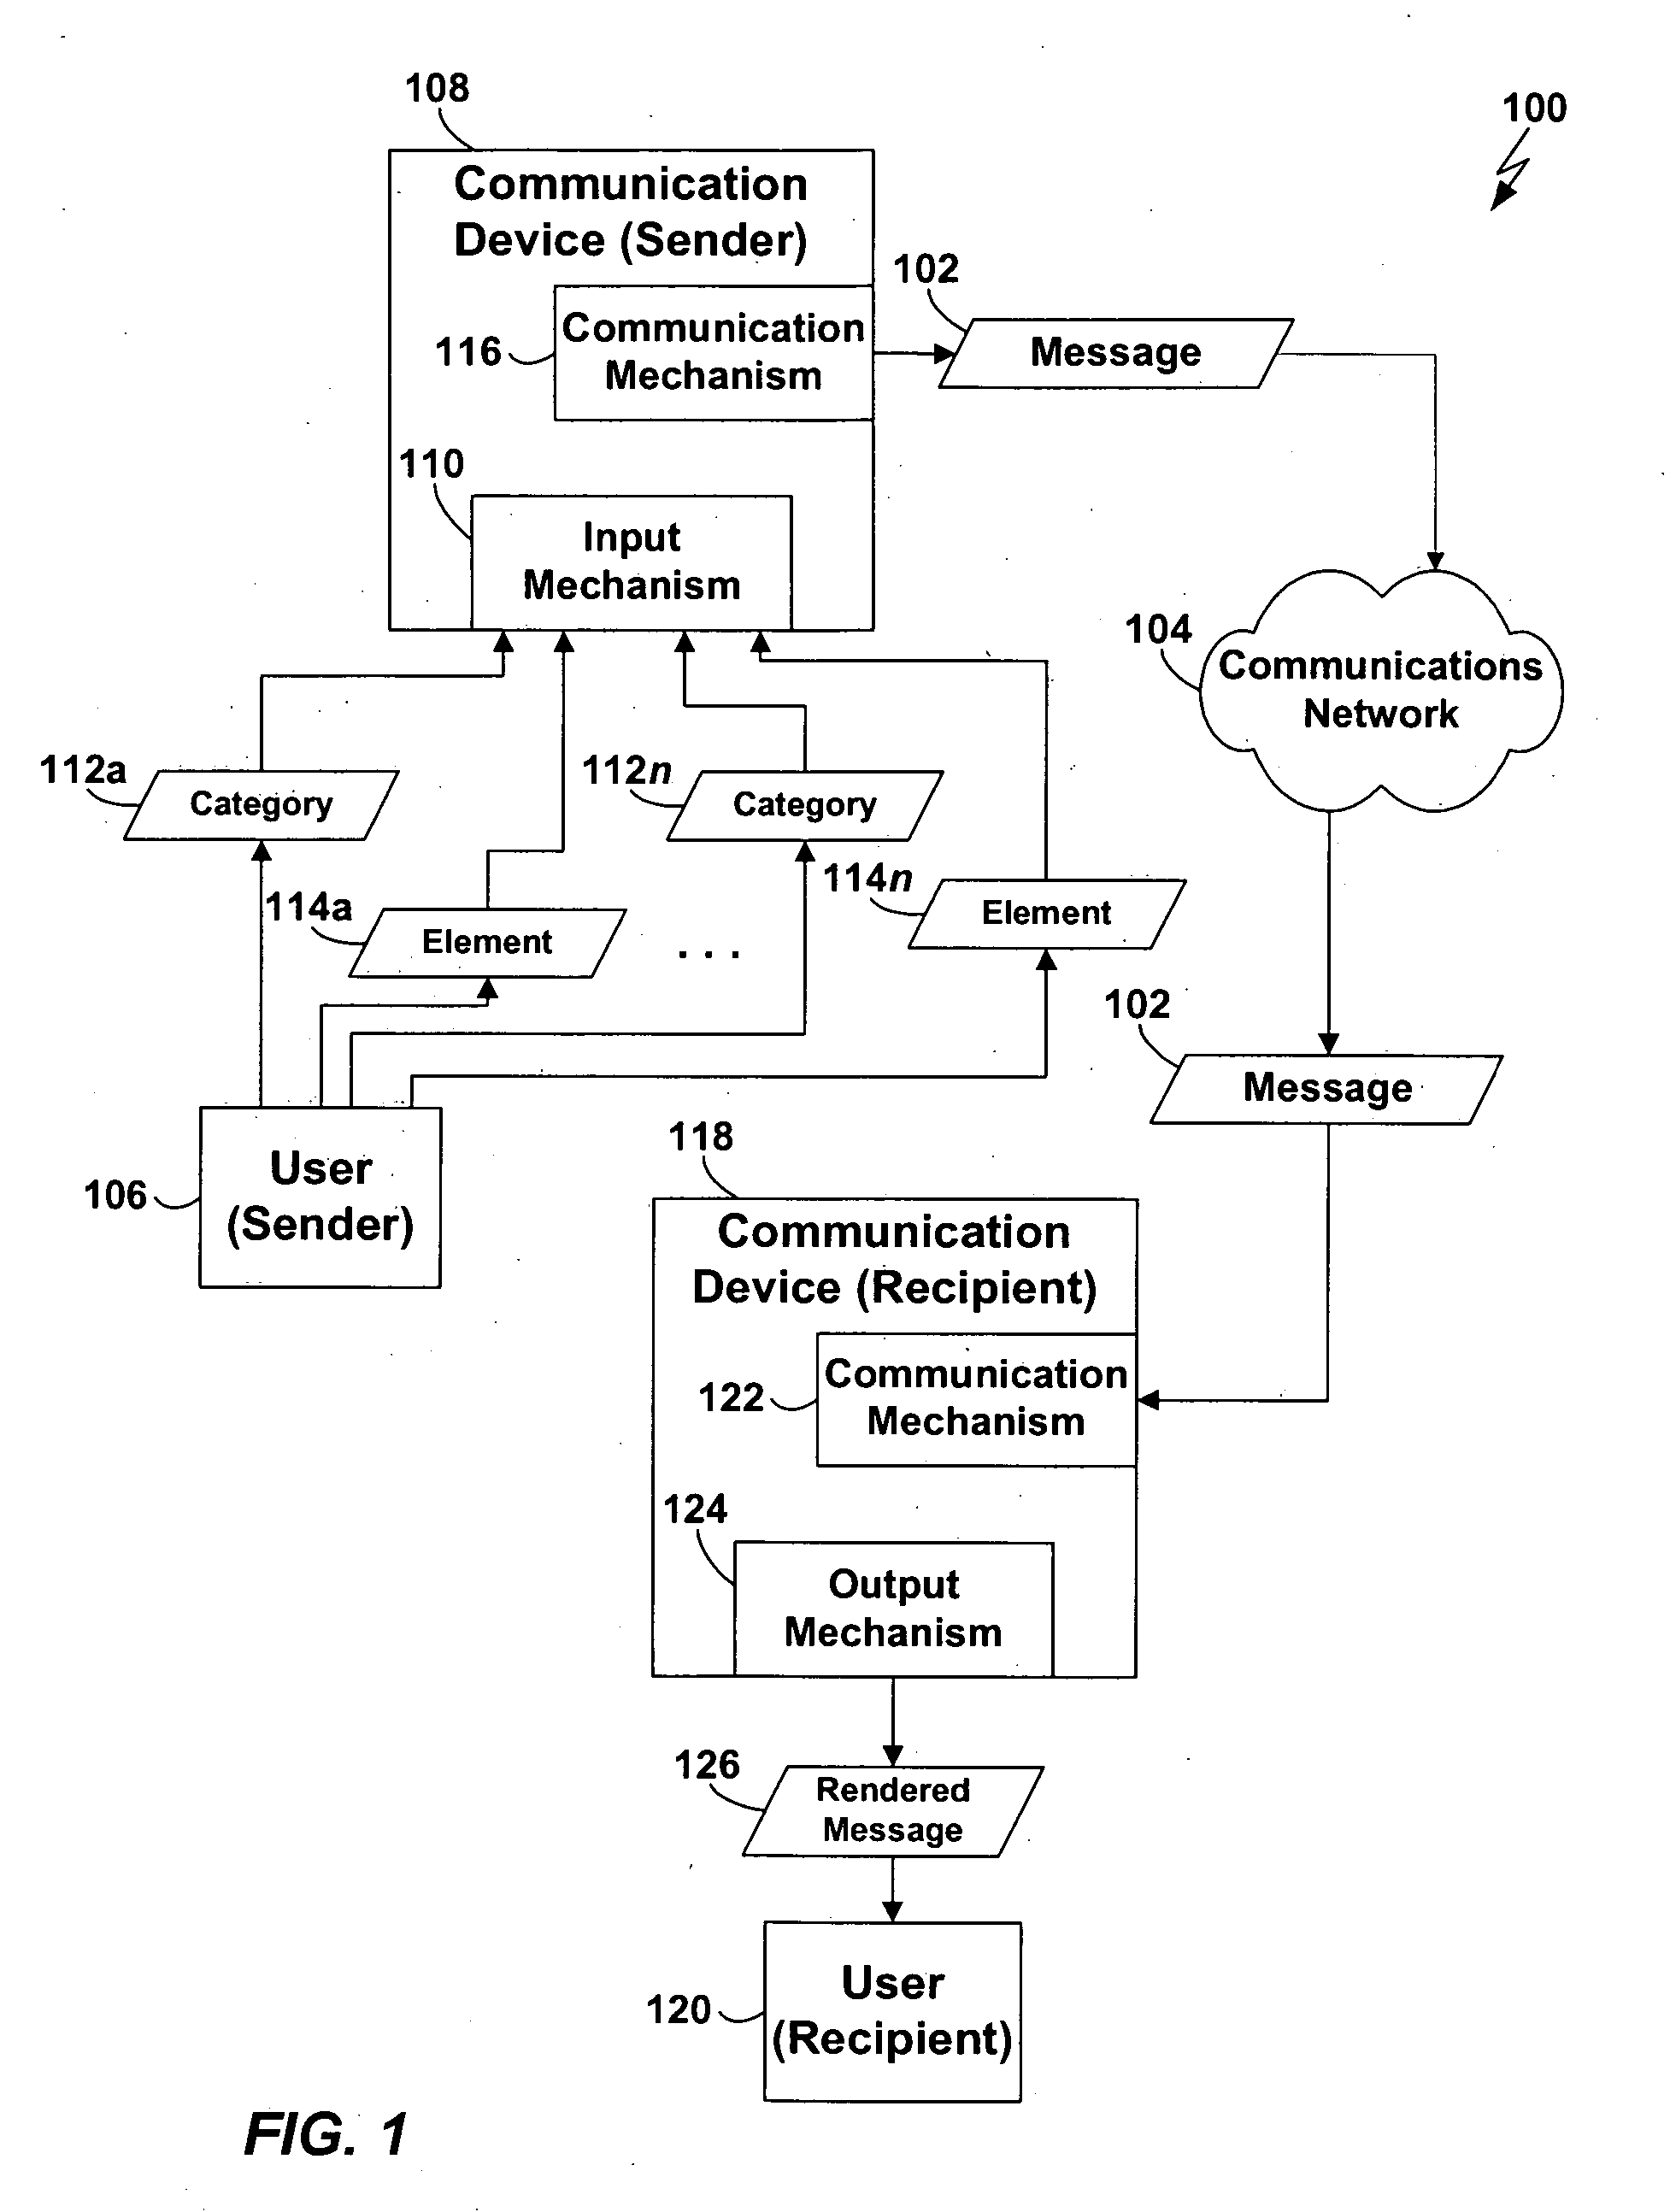 Graphical language messaging